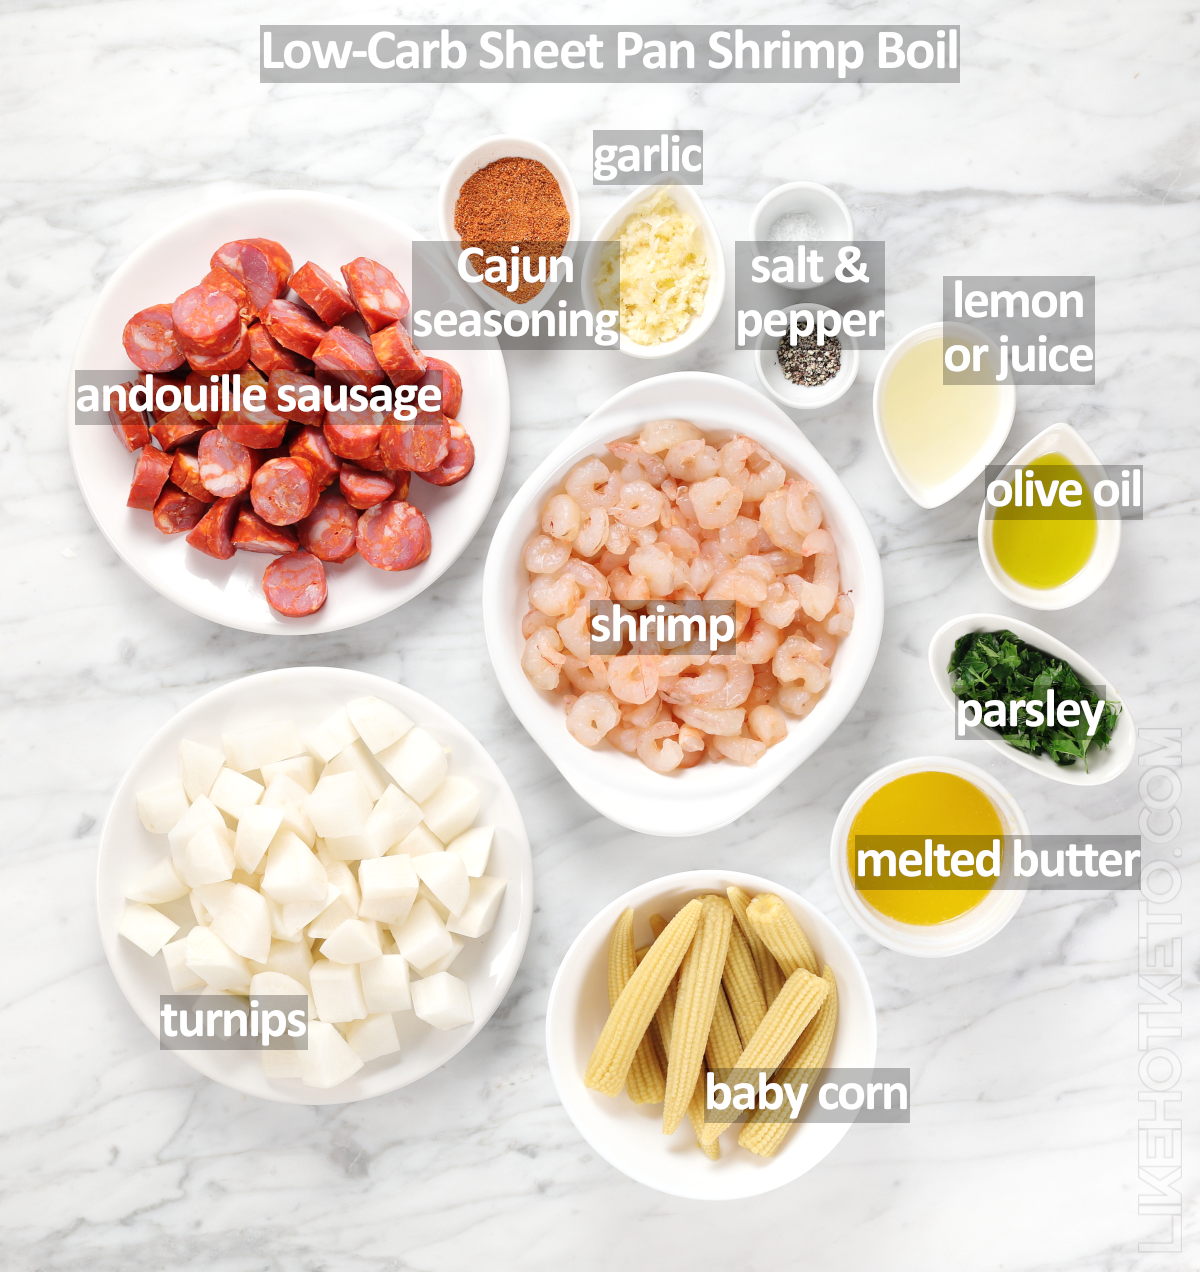 Ingredients for the low-carb shrimp boil in the oven.